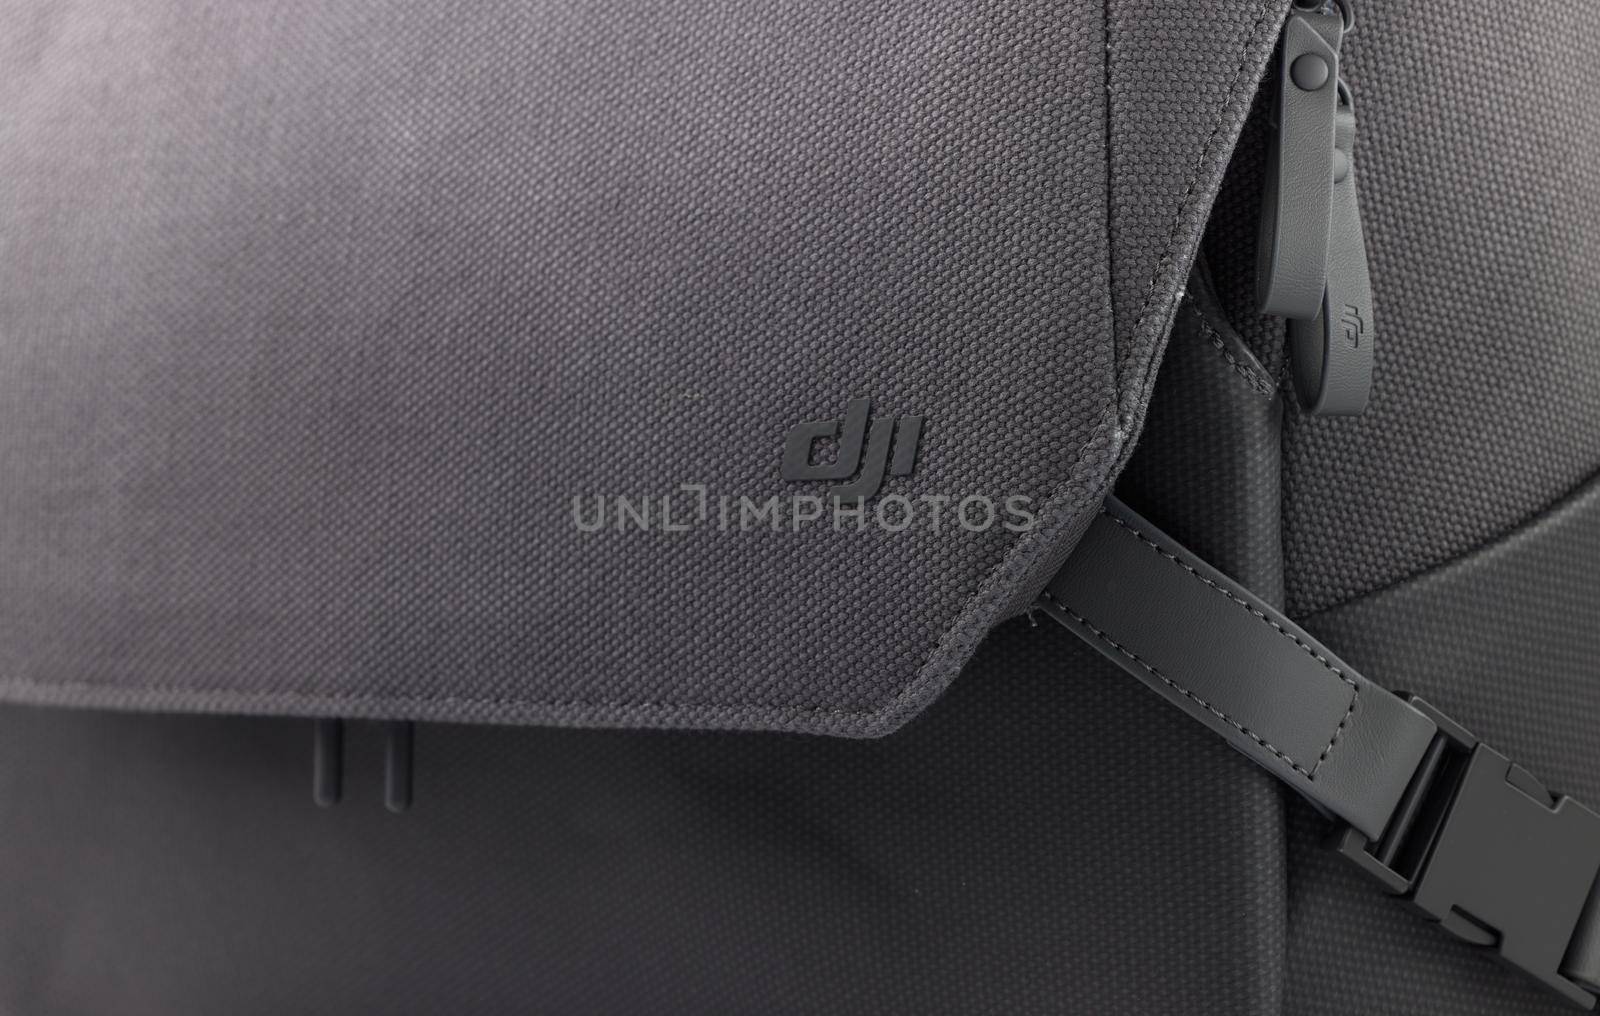 New DJI Mavic 3 Drone bag isolated on white. Accessory for carrying and storing the quadcopter. DJI world leader developer and manufacturers in UA. 17.12.2021, Rostov region, Russia.